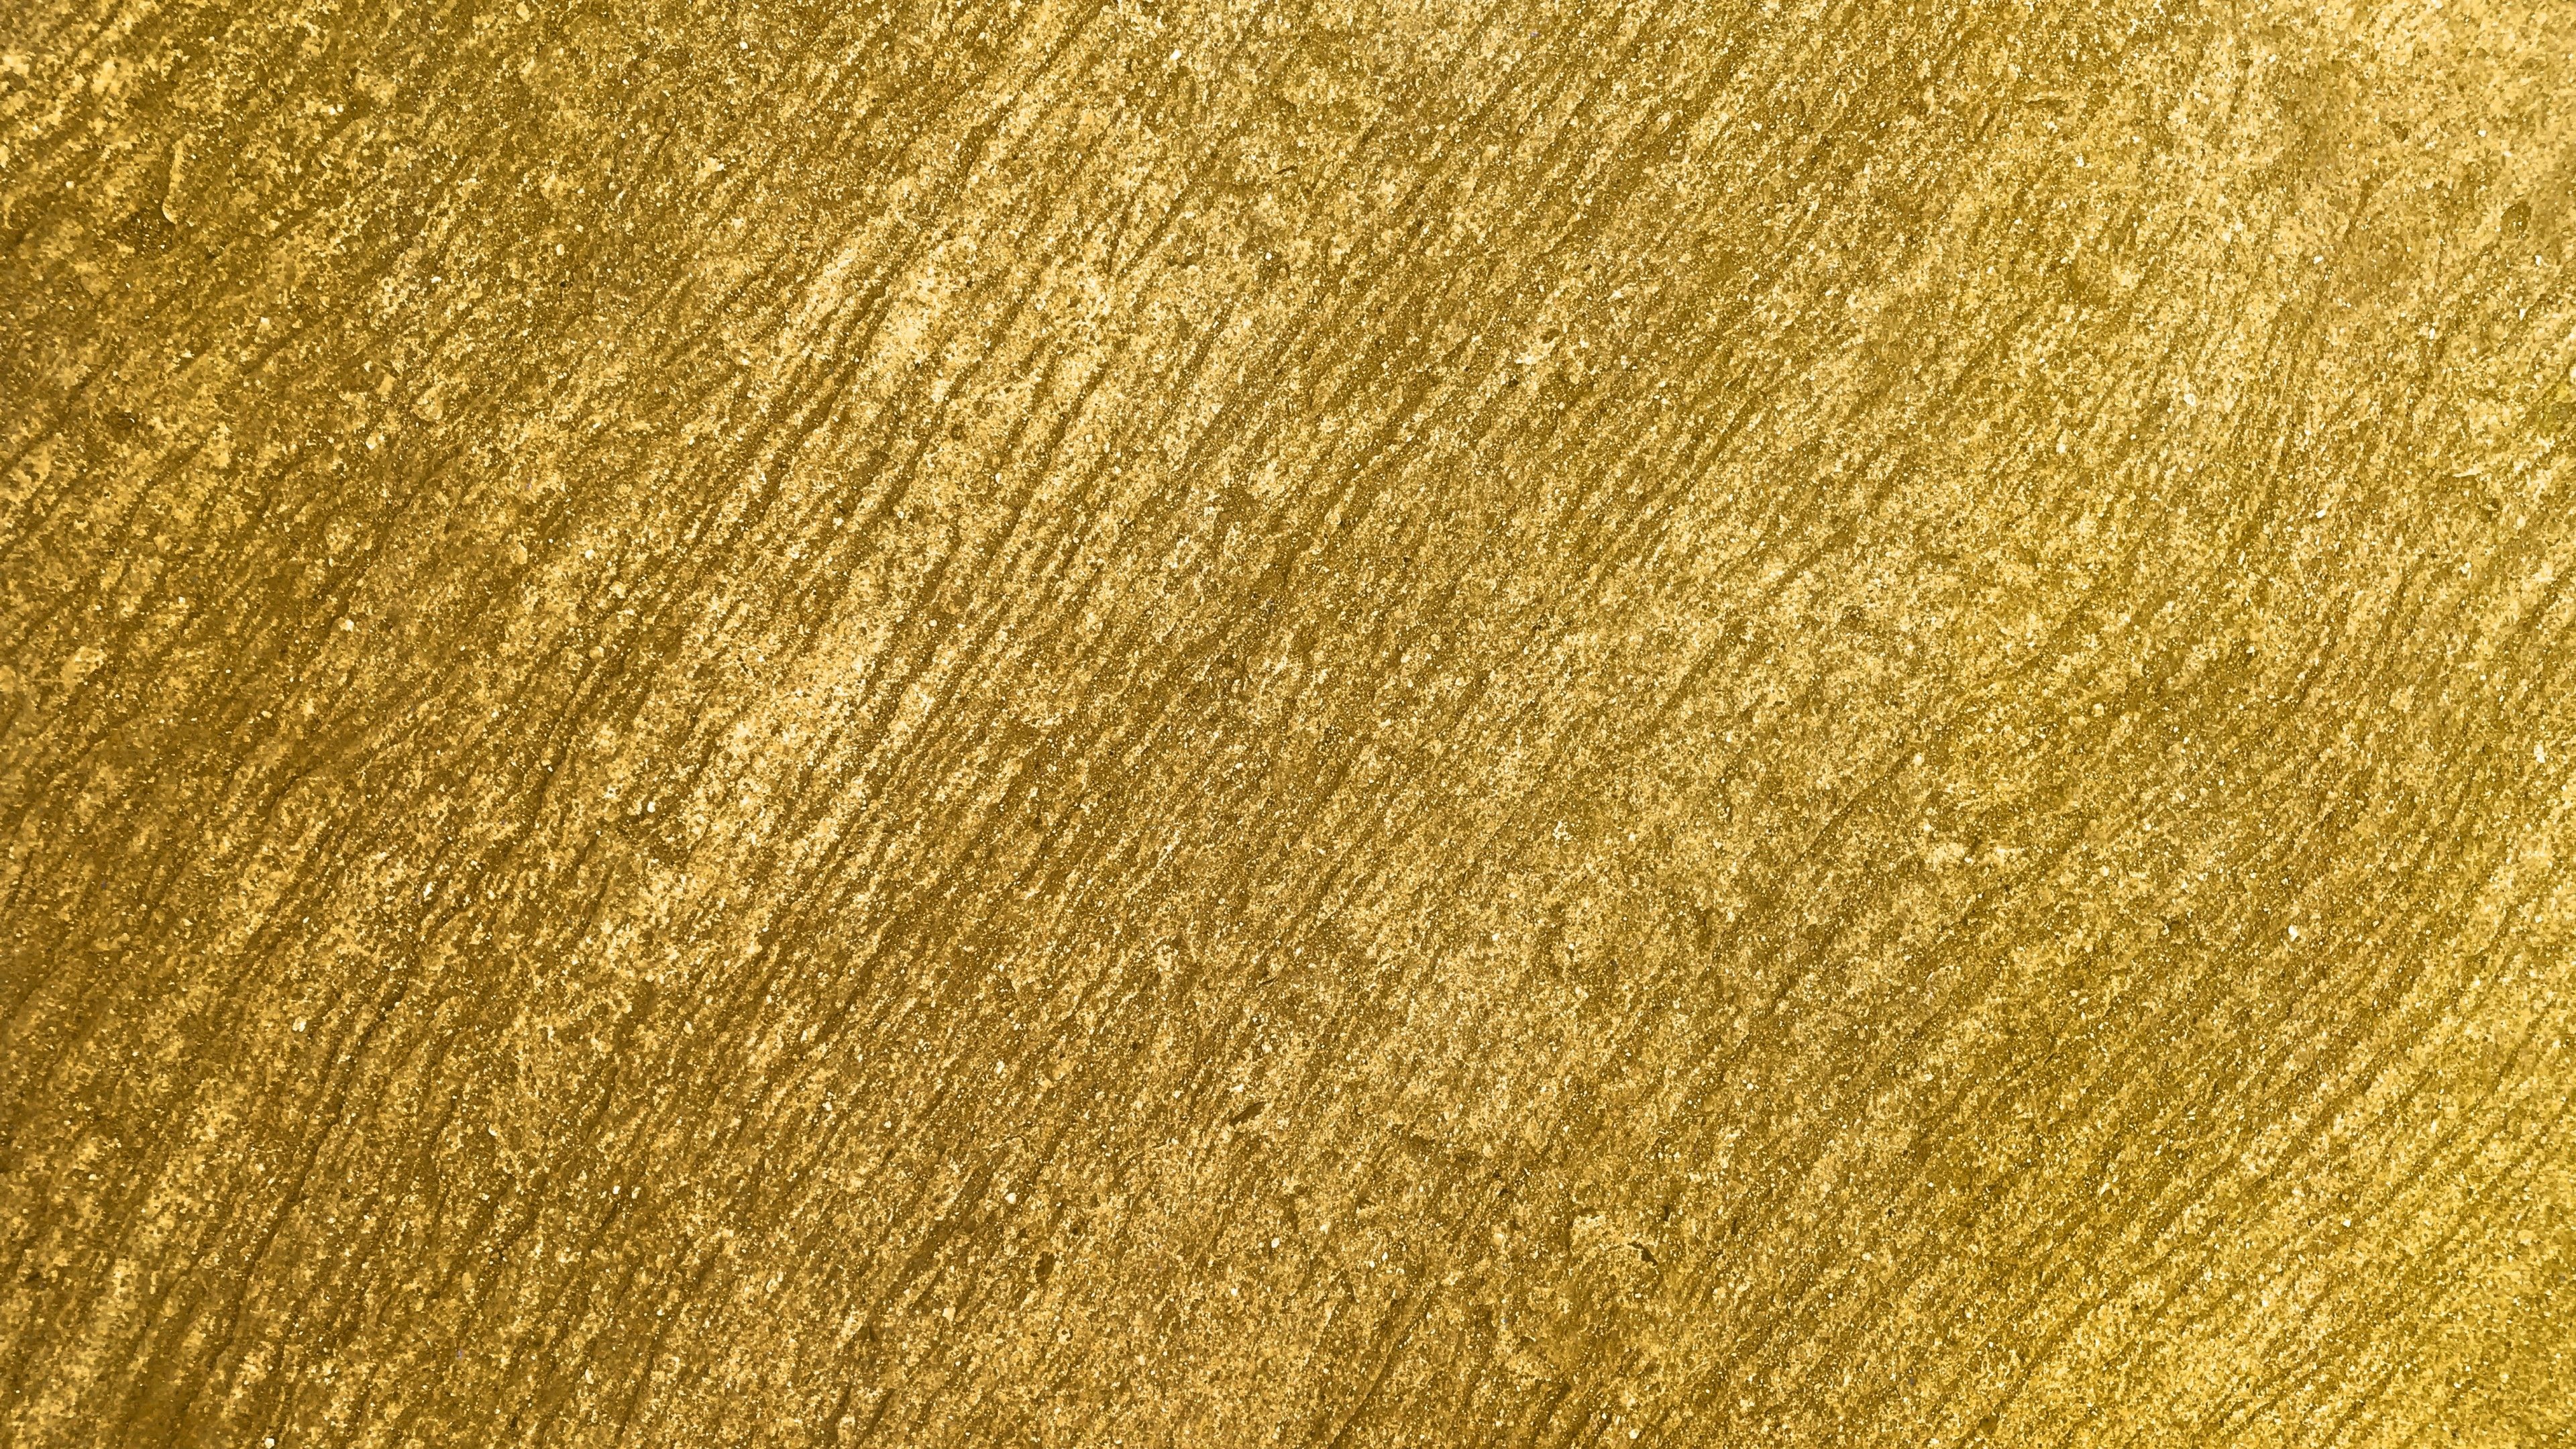 Download 3840x2160 Gold Texture, Pattern, Wall Wallpaper for UHD